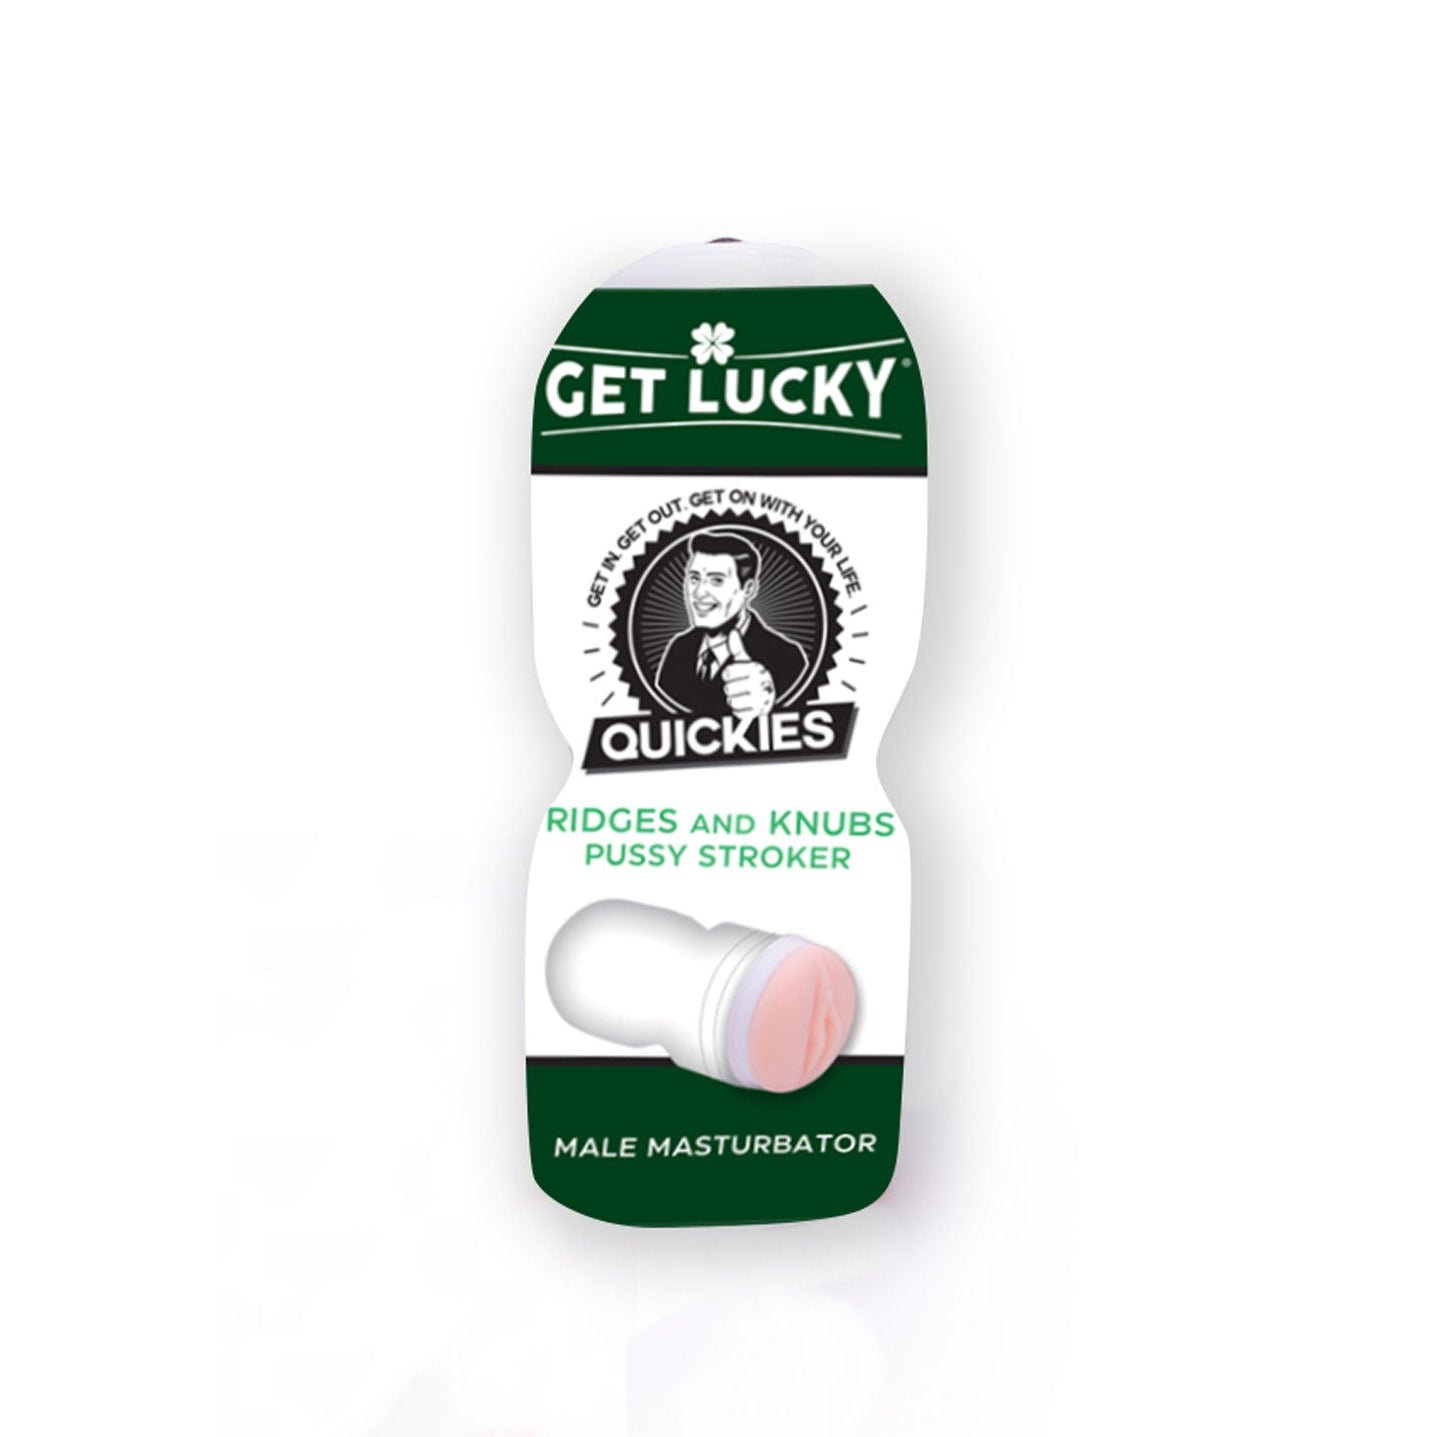 Get Lucky Quickies Ridges and Knubs Pussy Stroker